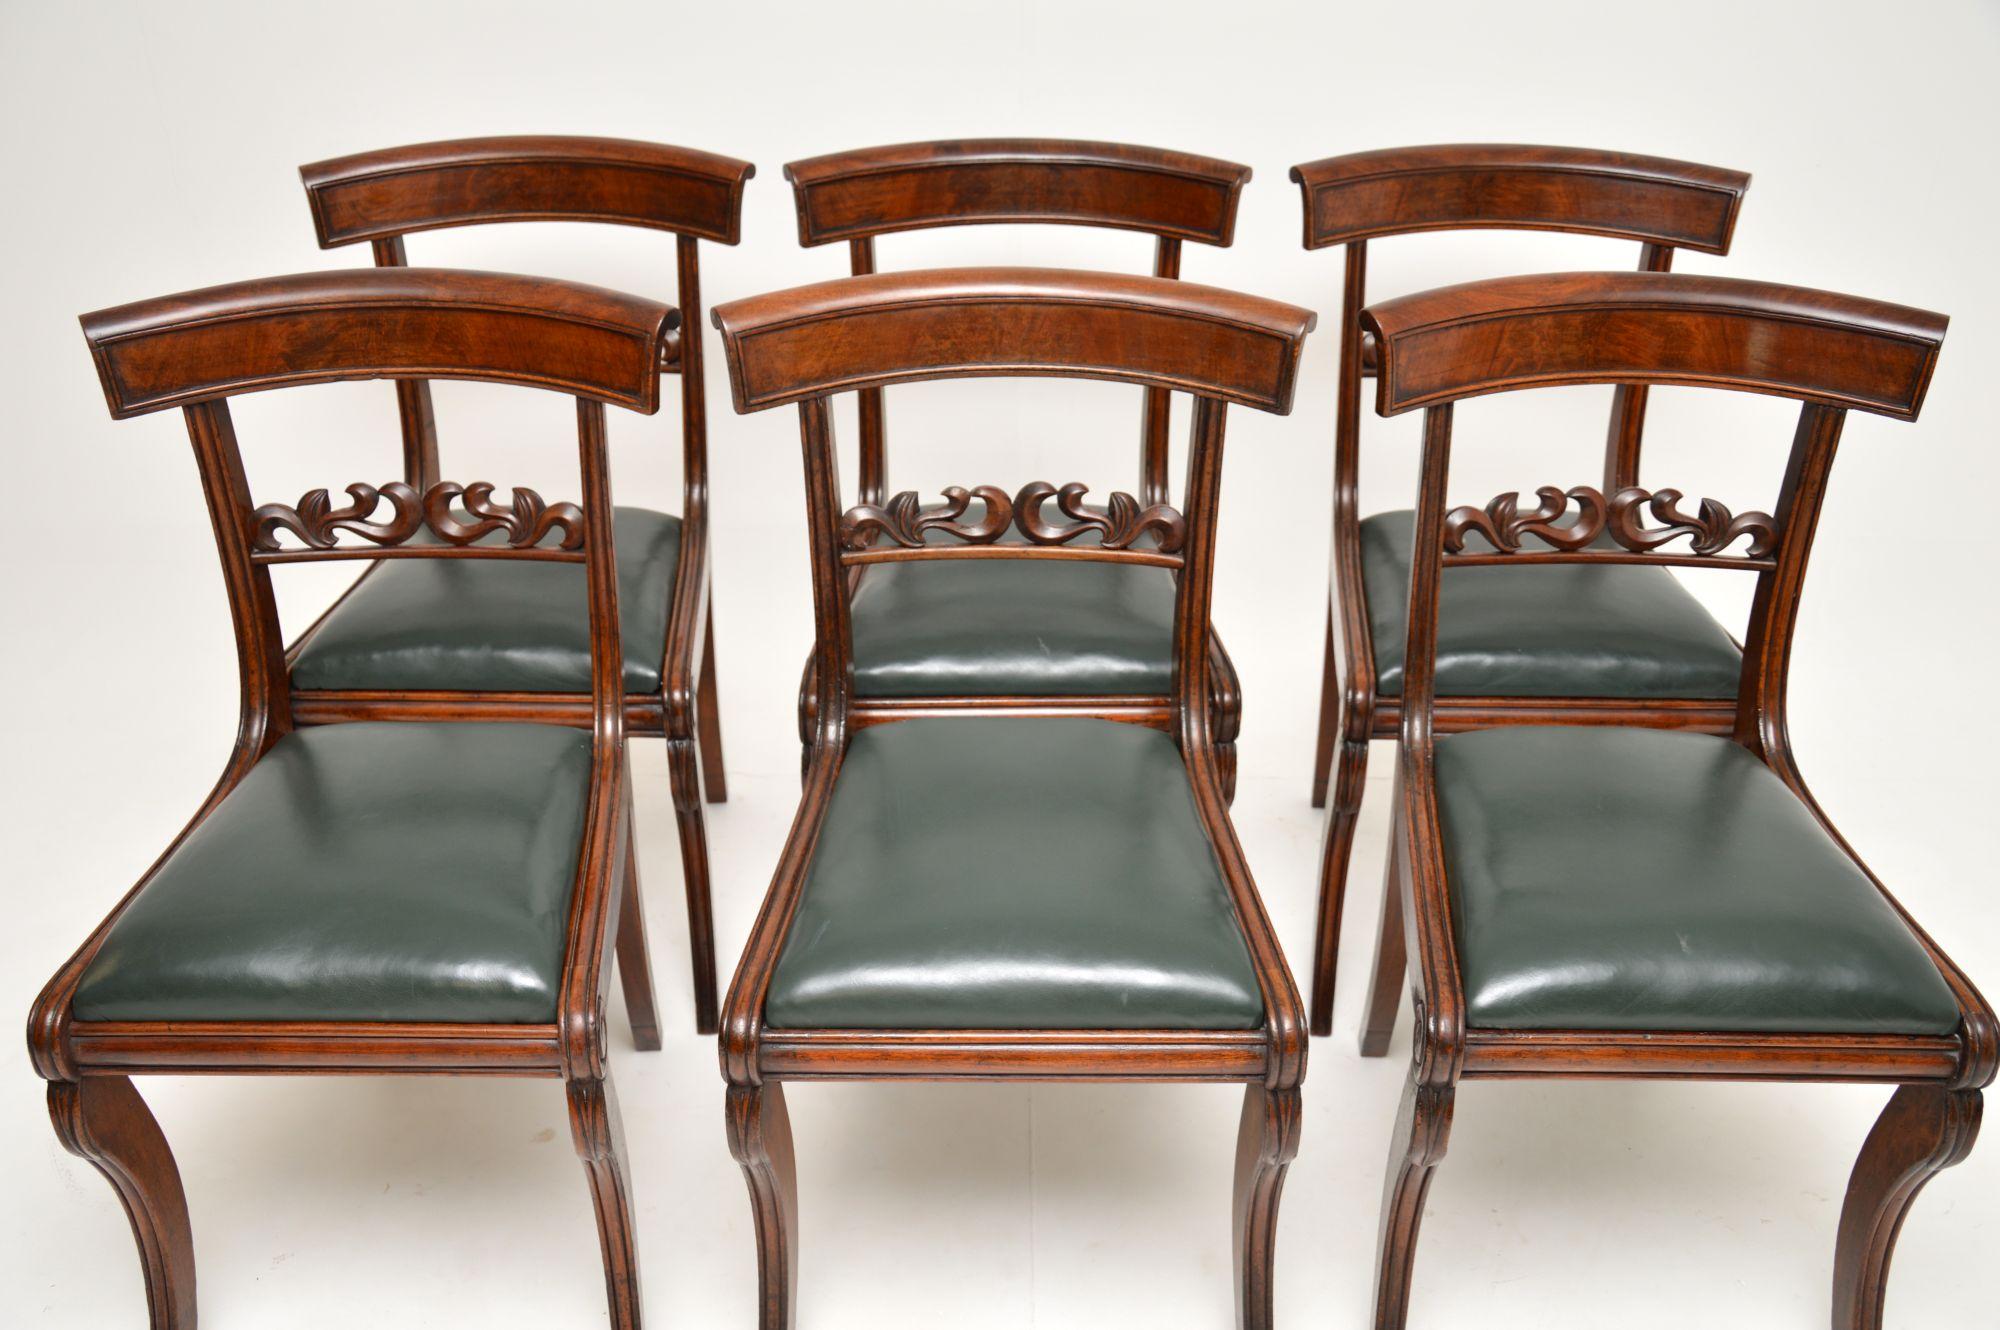 Set of 6 Antique Regency Wood & Leather Dining Chairs 4